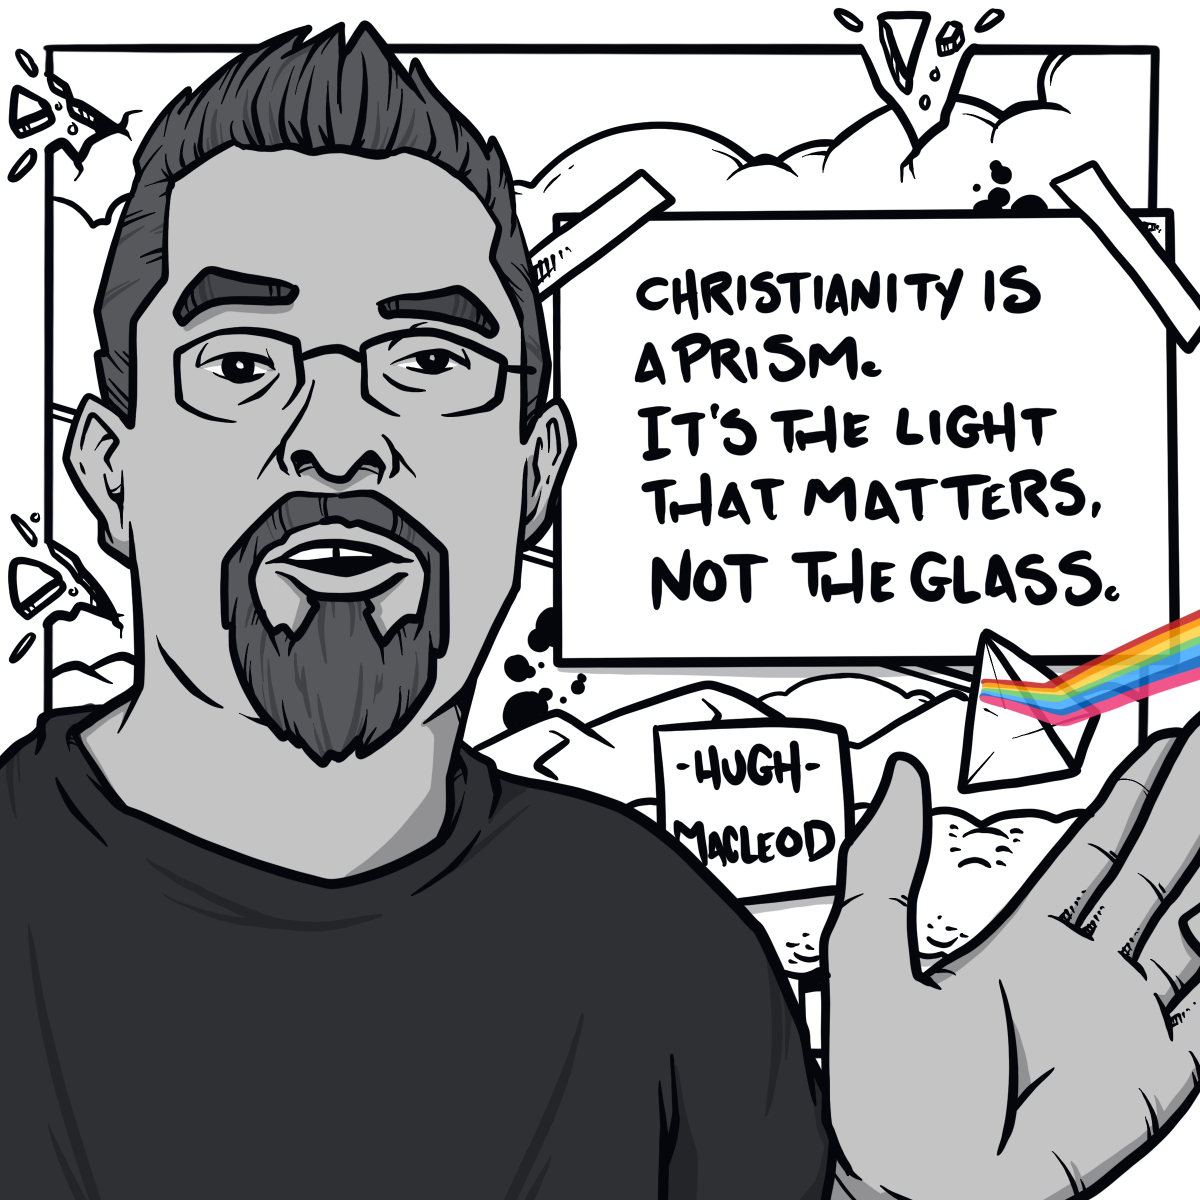 Christianity is a Prism